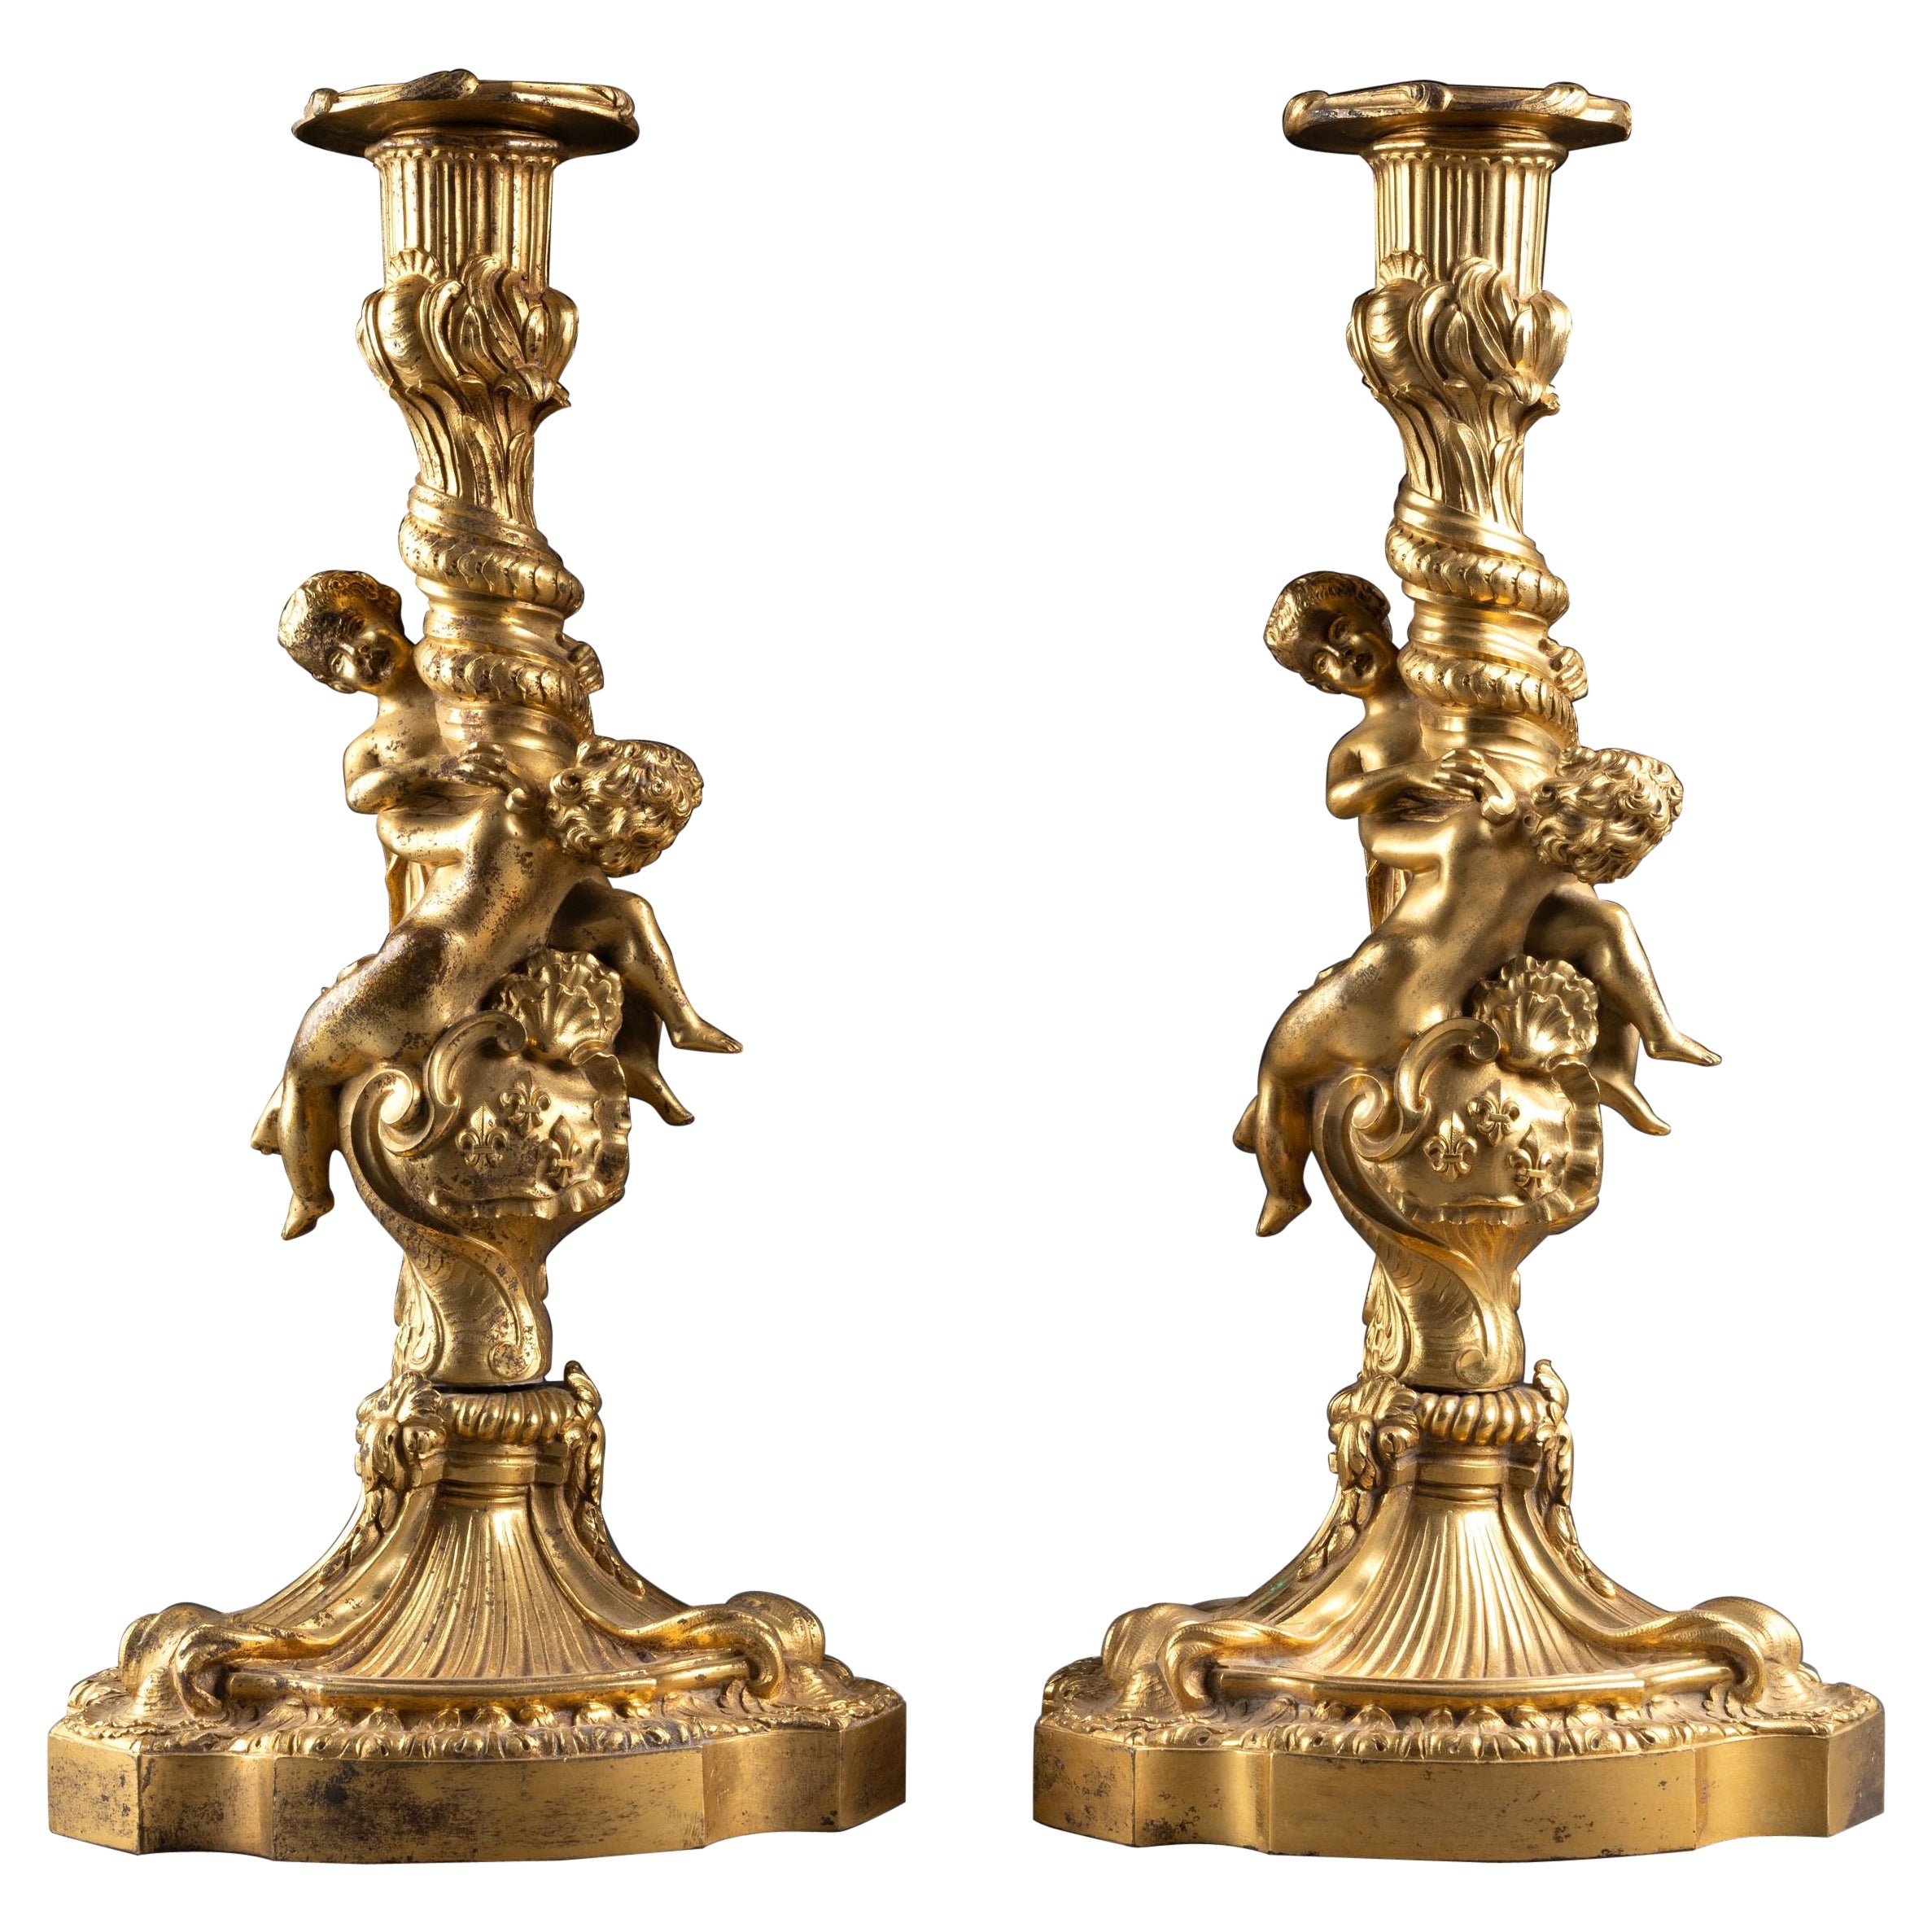 19th C. Pair of Louis XV Gilt Bronze Candlesticks with French Royal Coat of Arms For Sale